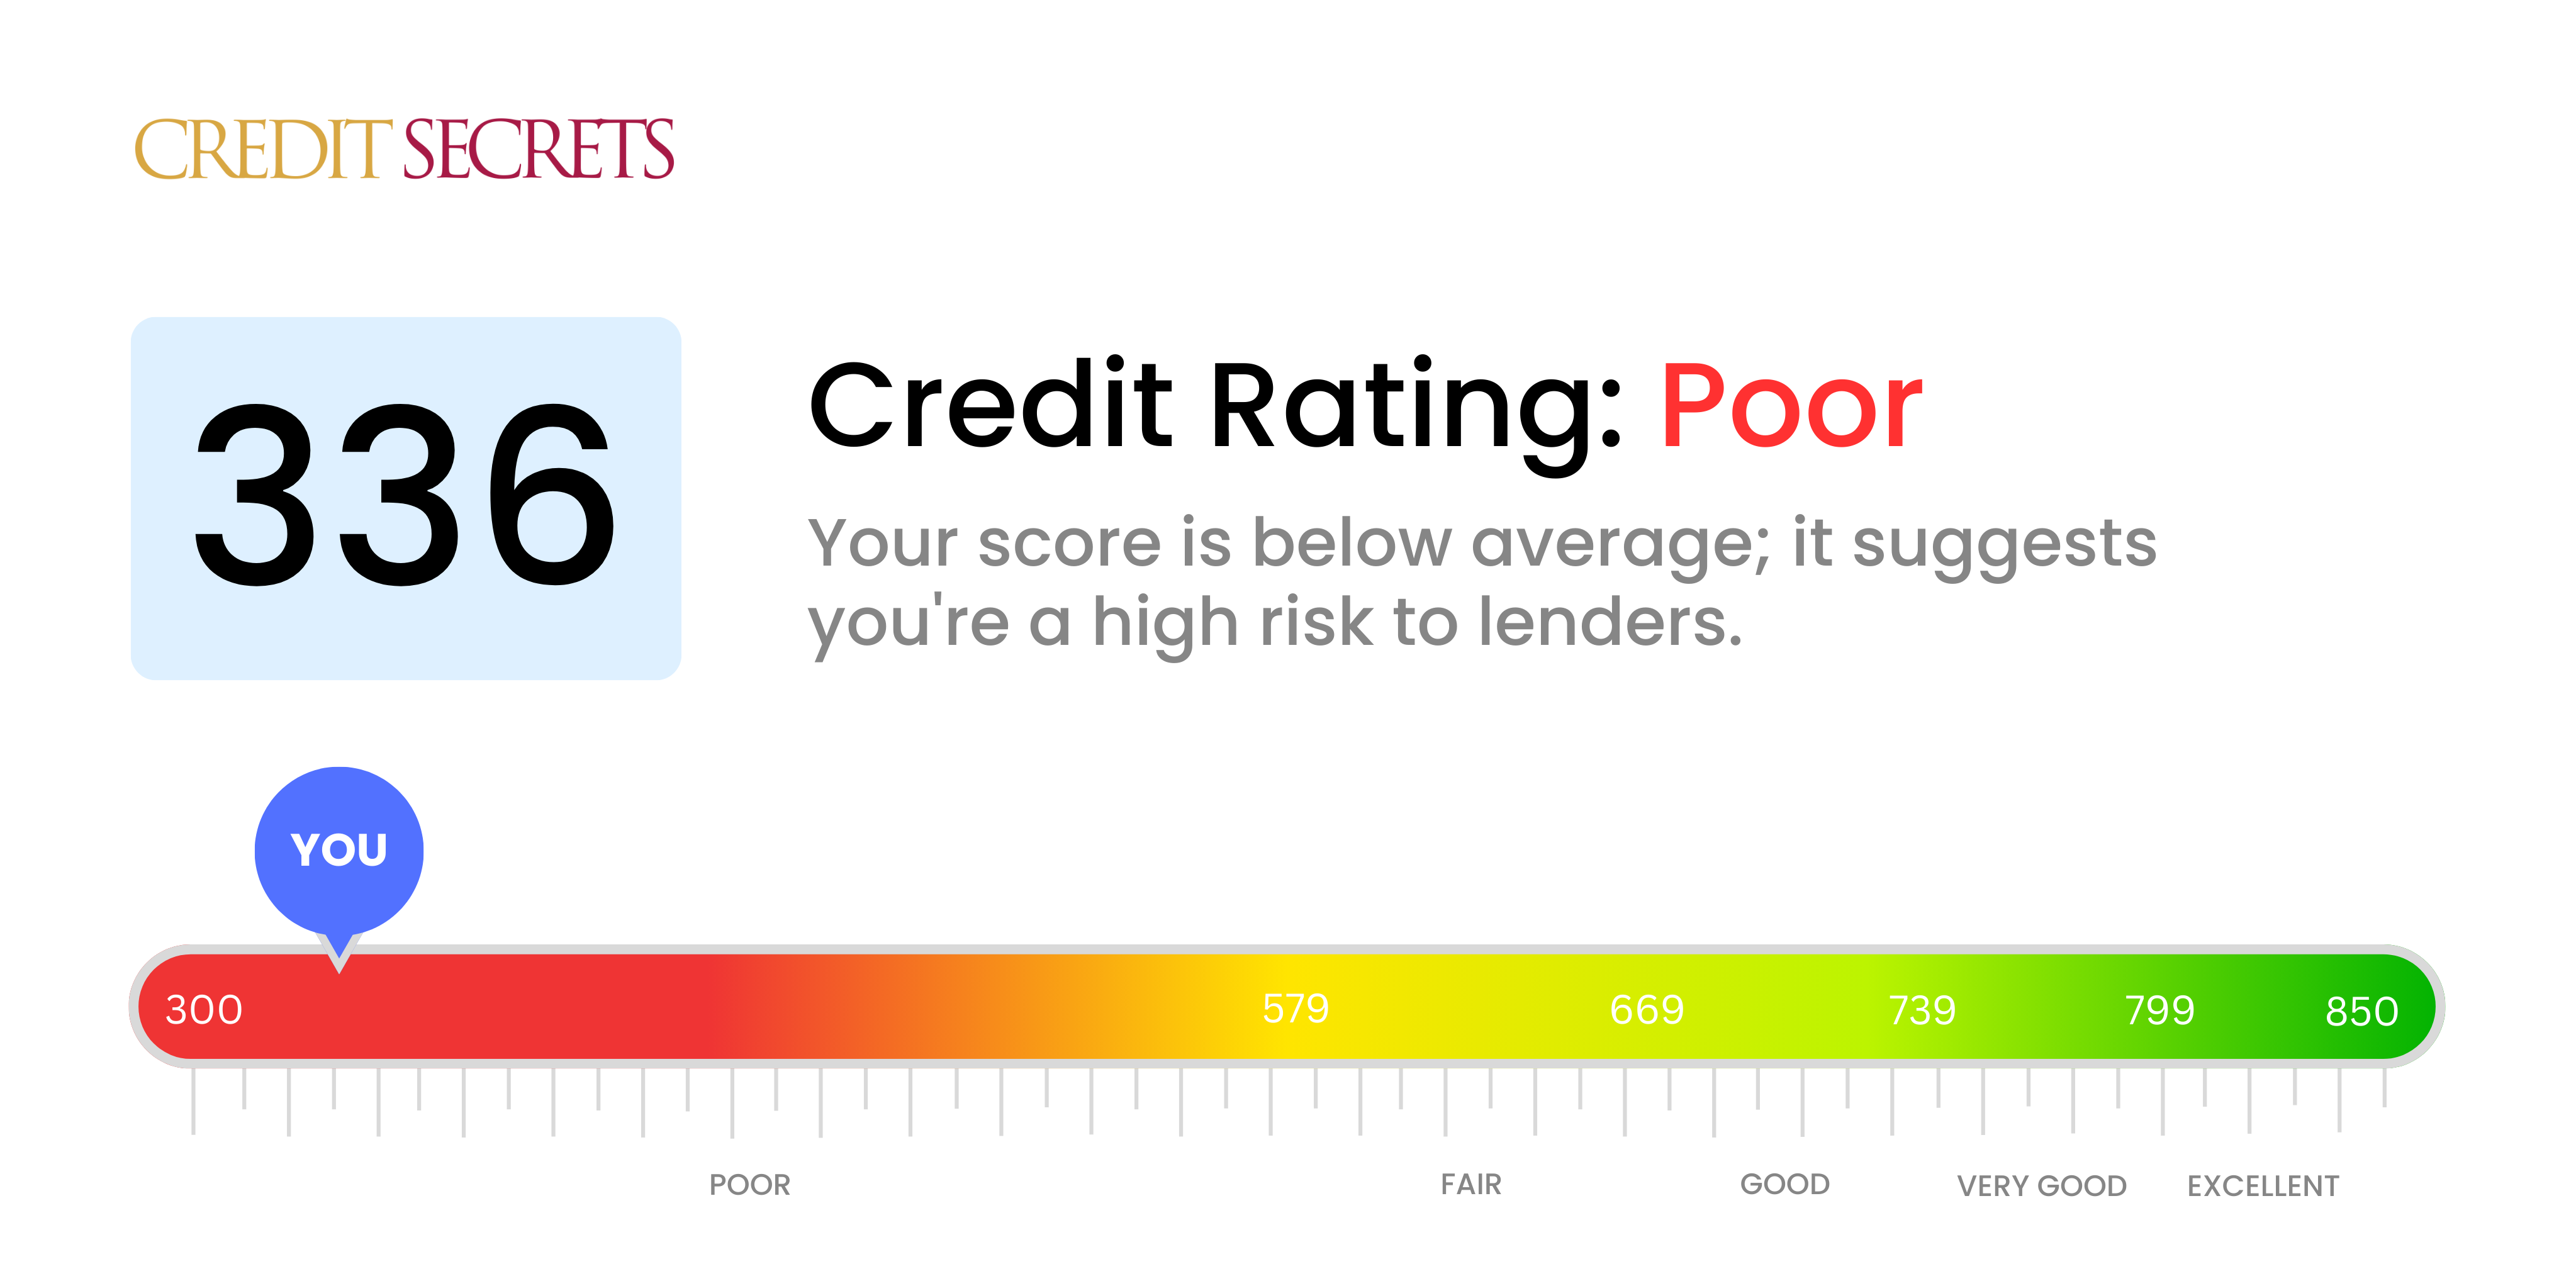 Is 336 a good credit score?